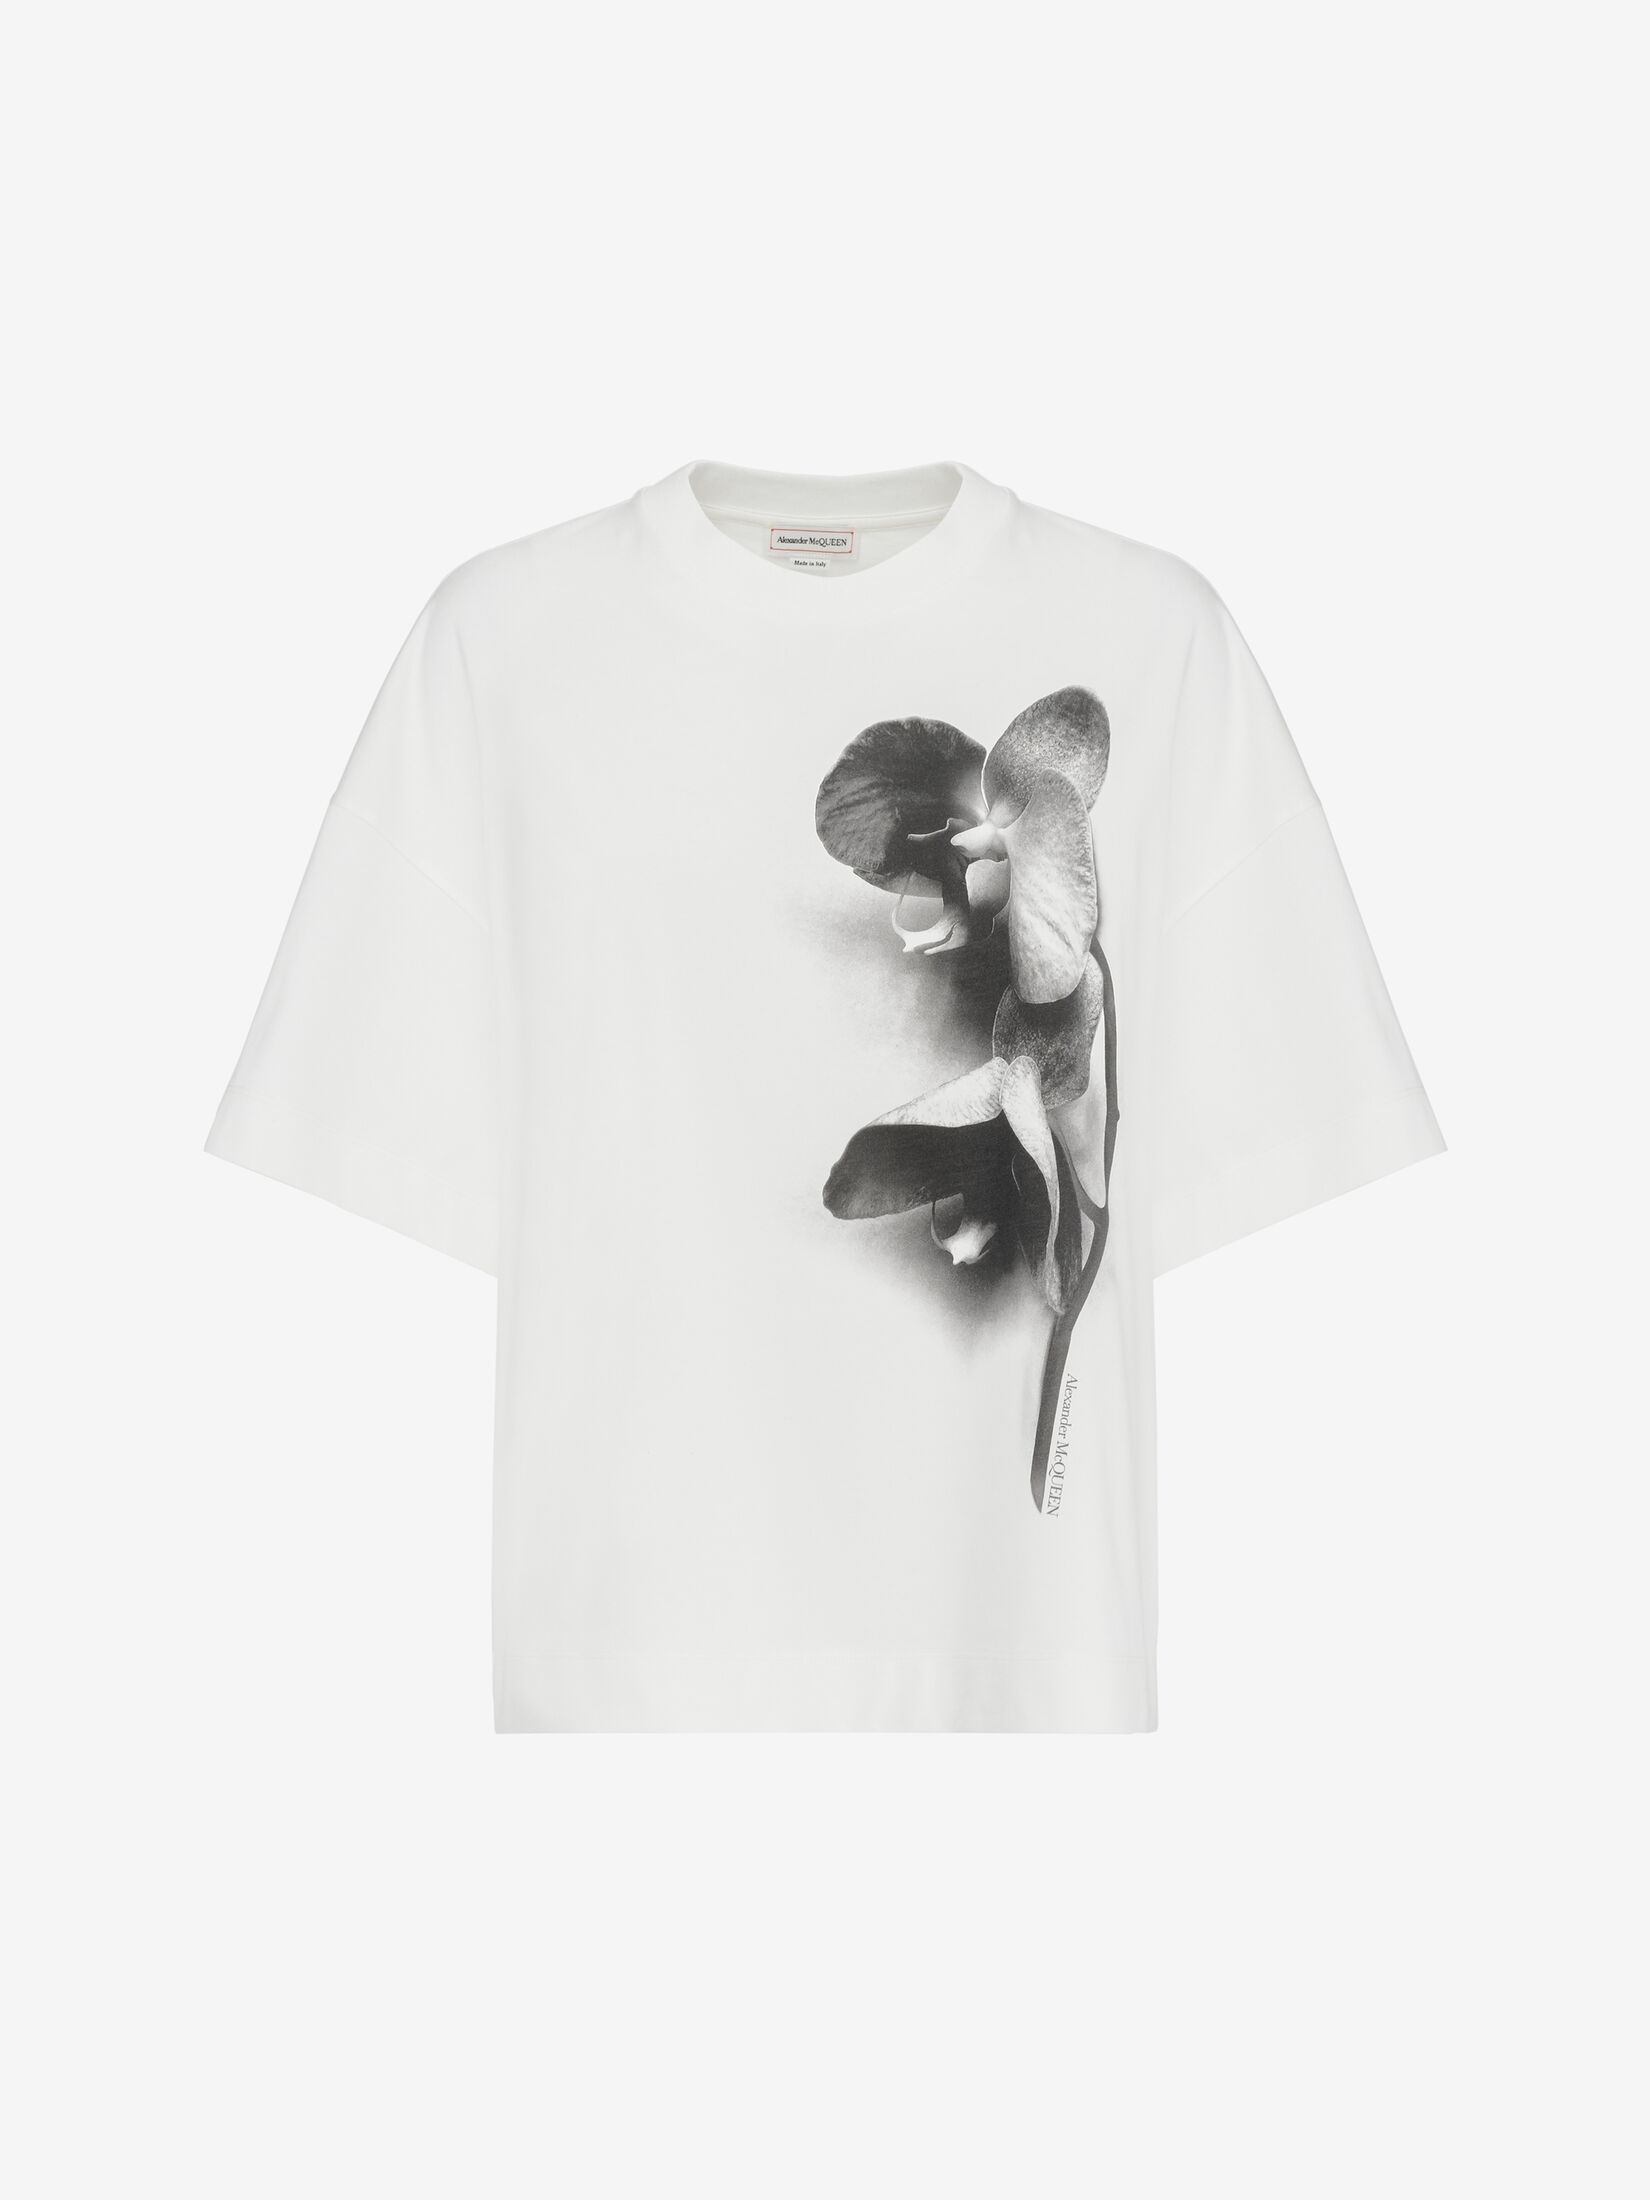 Oversized-T-Shirt mit Photographic Orchid